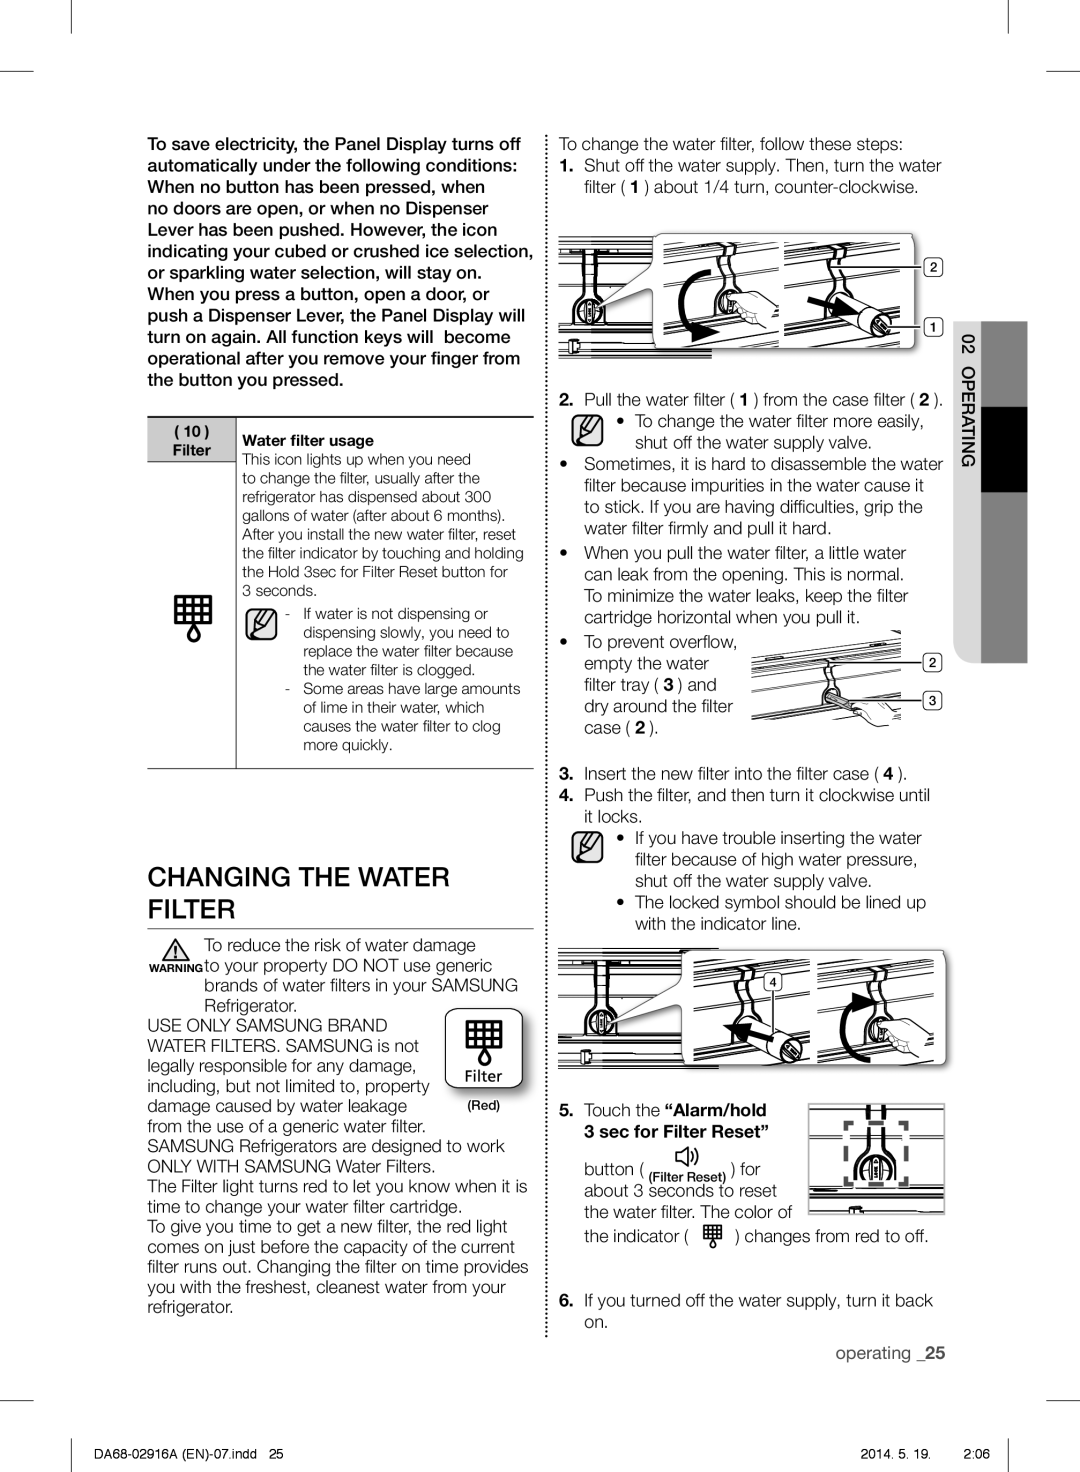 Samsung RF24FSEDBSR user manual Changing The Water Filter, operating 